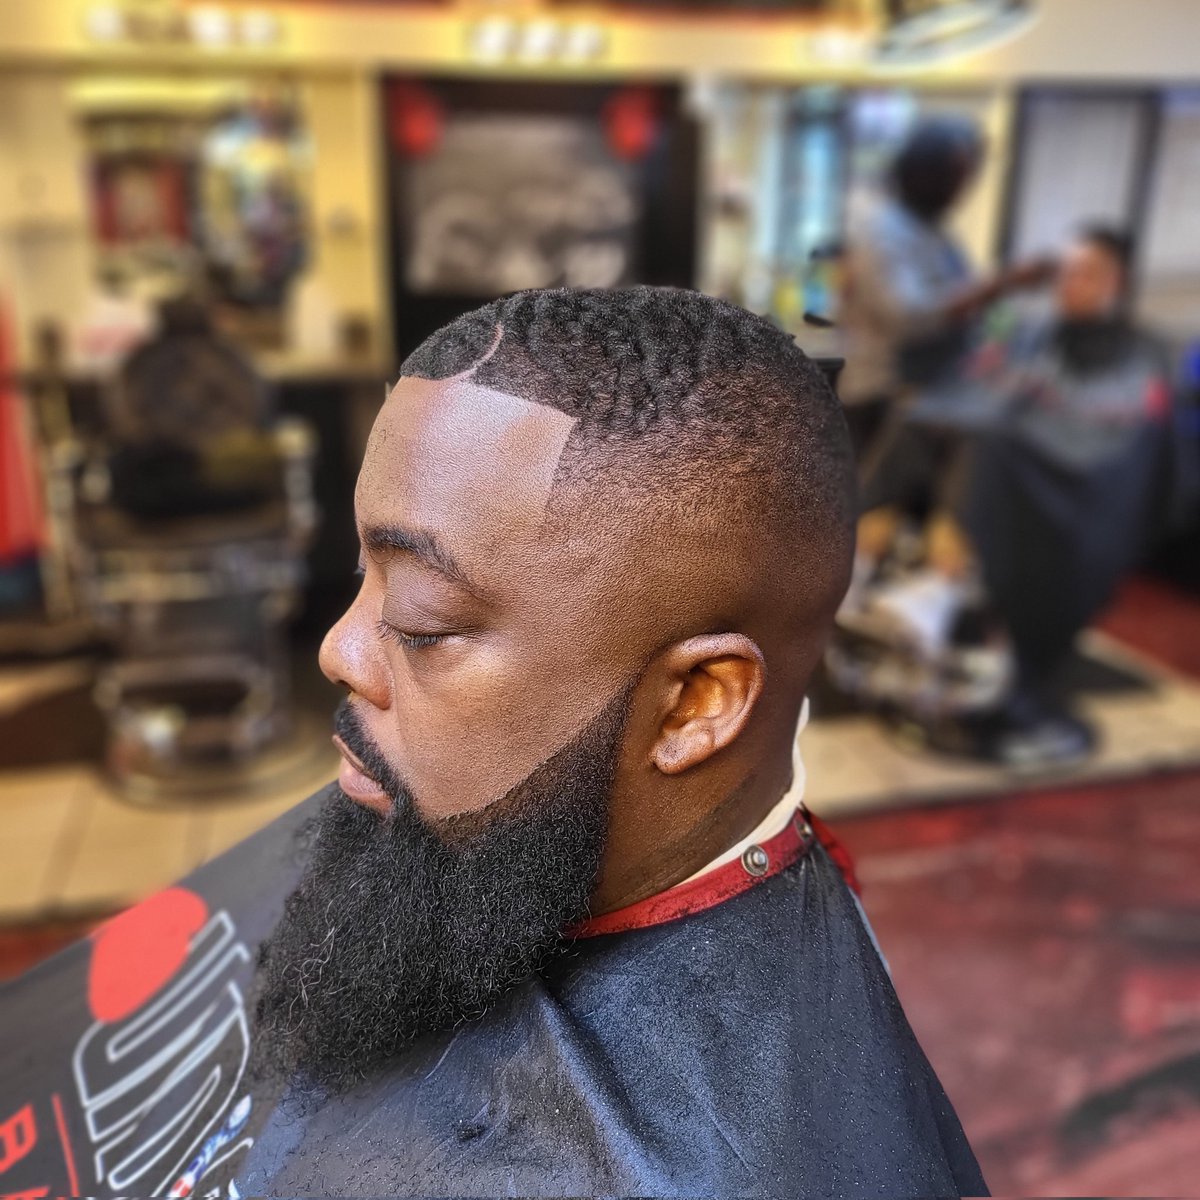 Come see us today and get that blessing #scbarbershop #undisputedbarbershop #men's #fashion